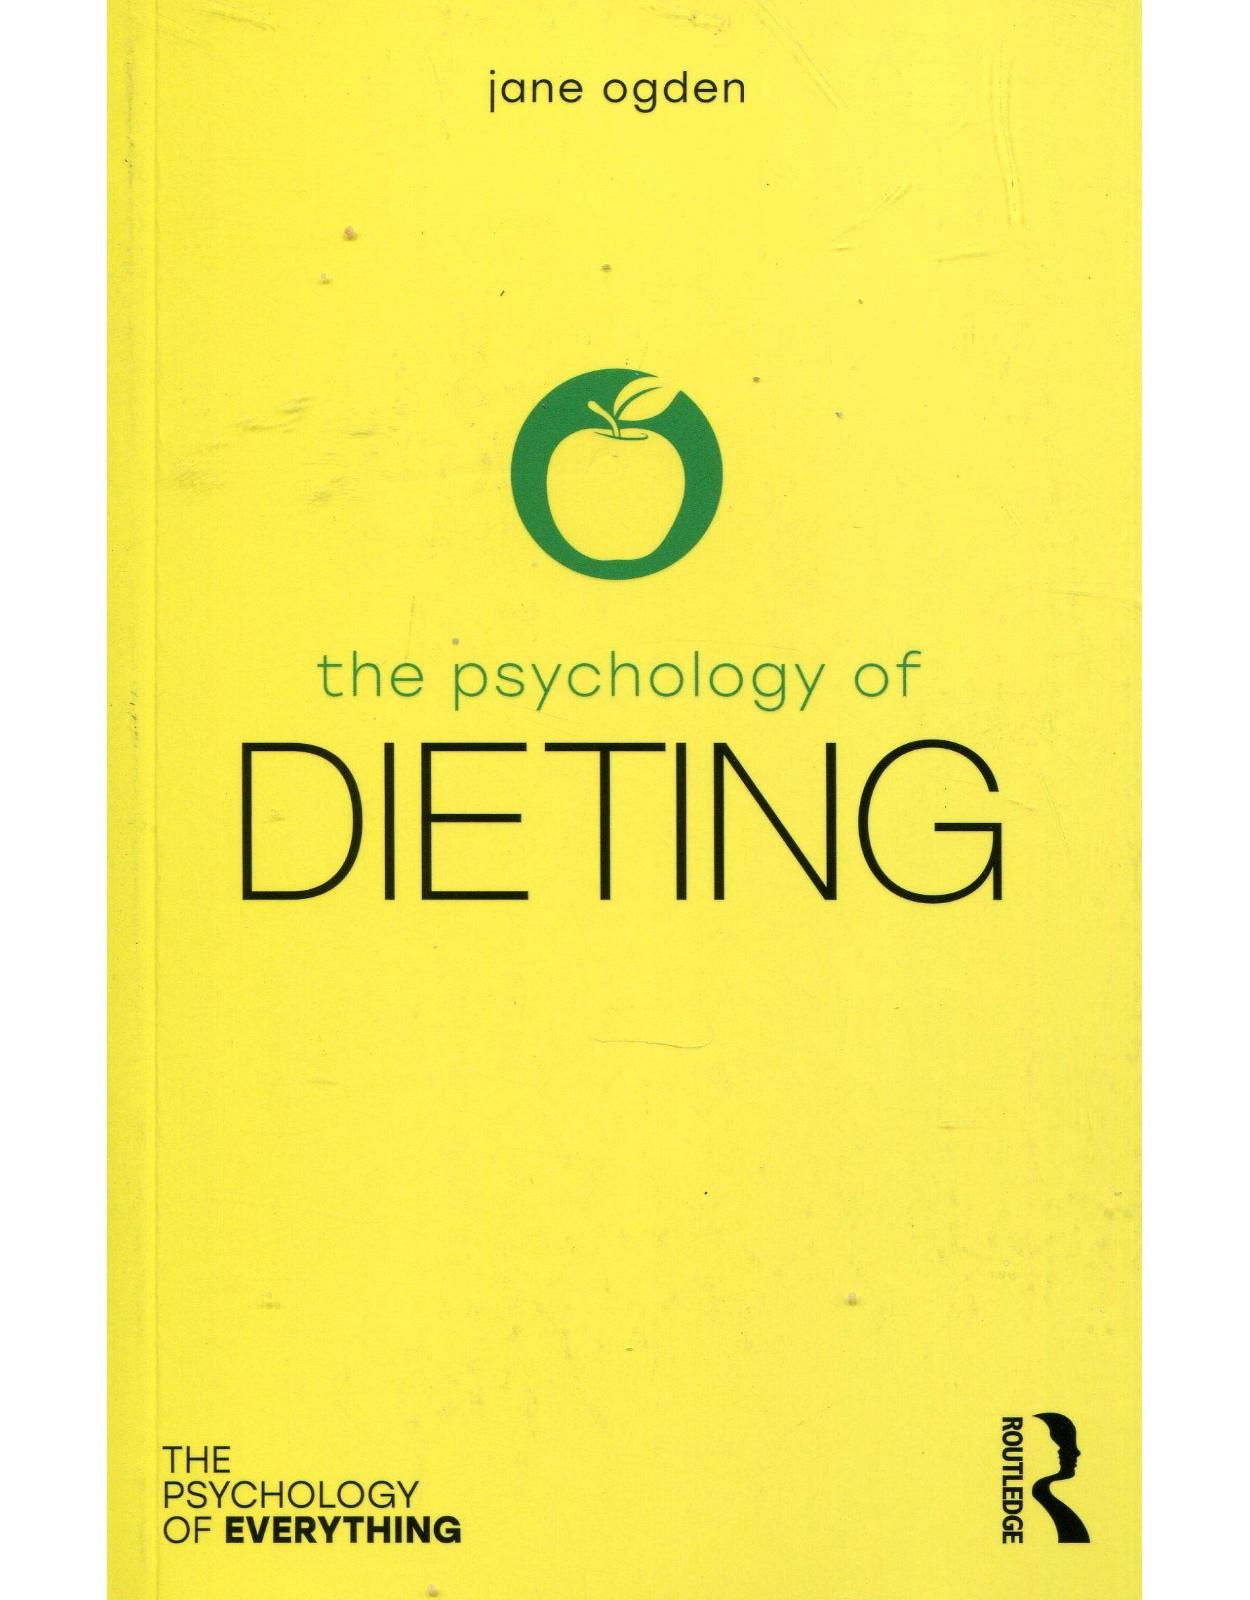 The Psychology of Dieting (The Psychology of Everything) 